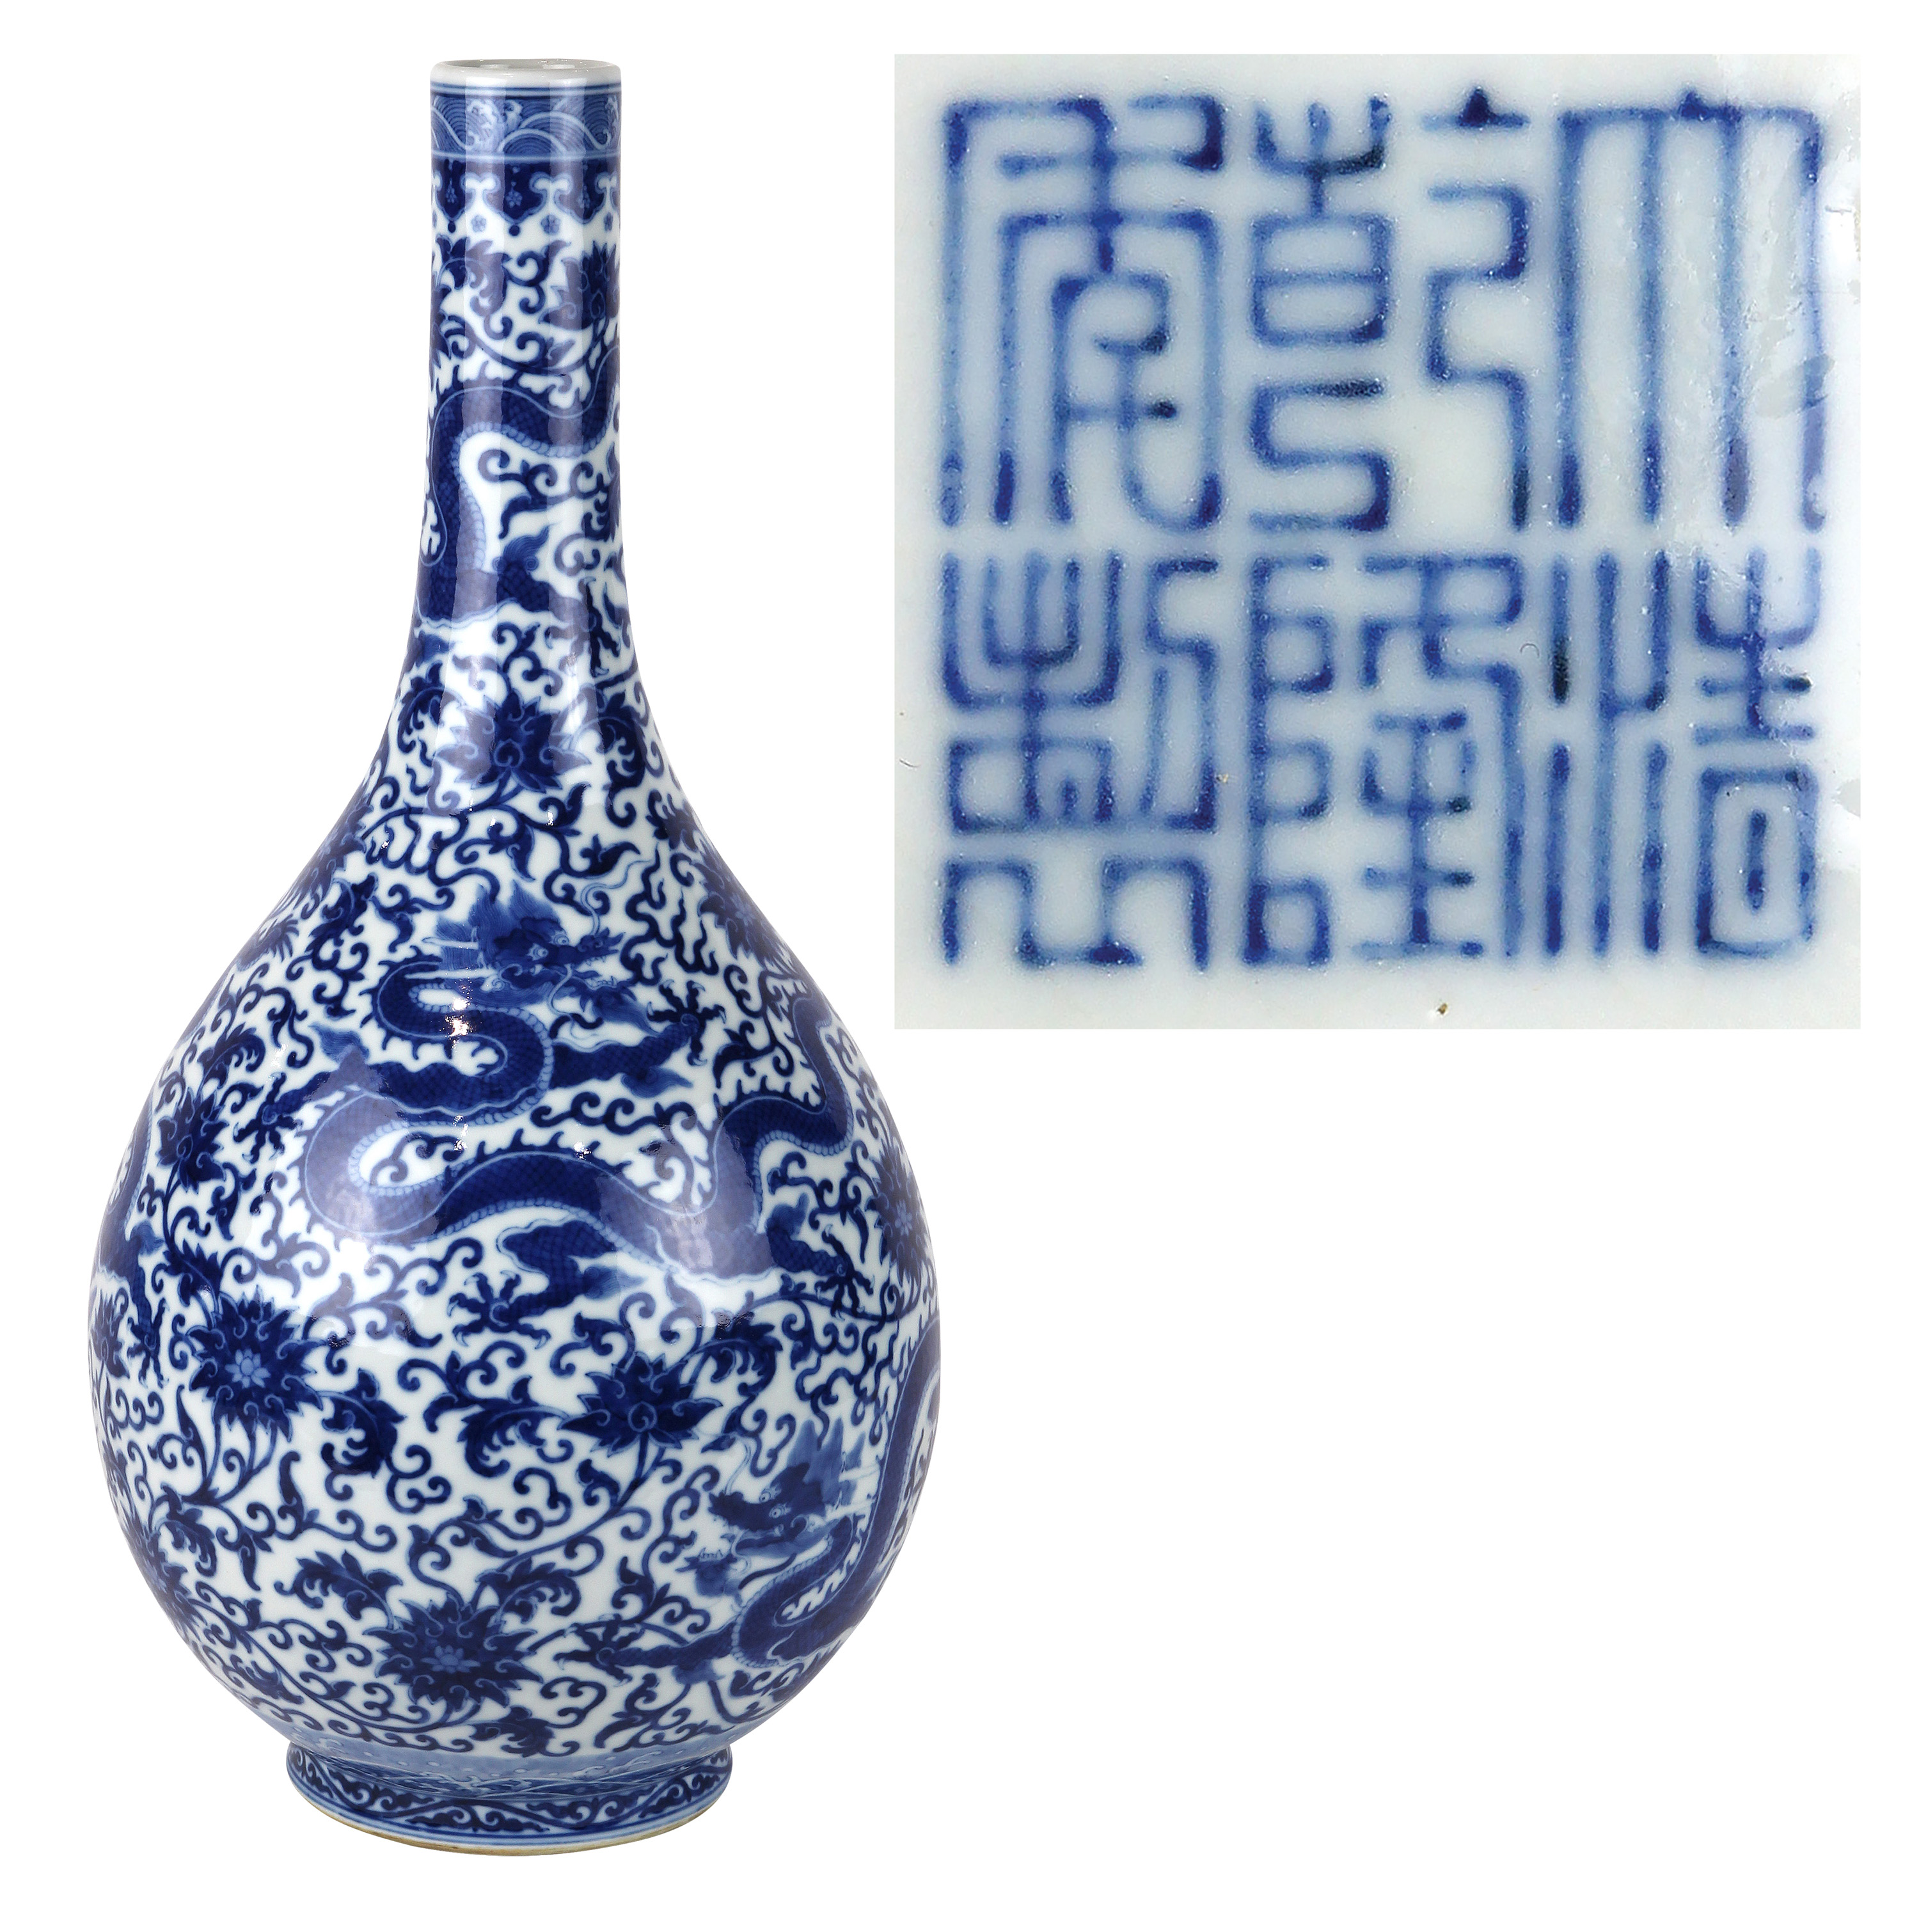 This Chinese underglaze blue and white porcelain stick dragon vase sold for an astonishing $426,000. Clars Auction Gallery image